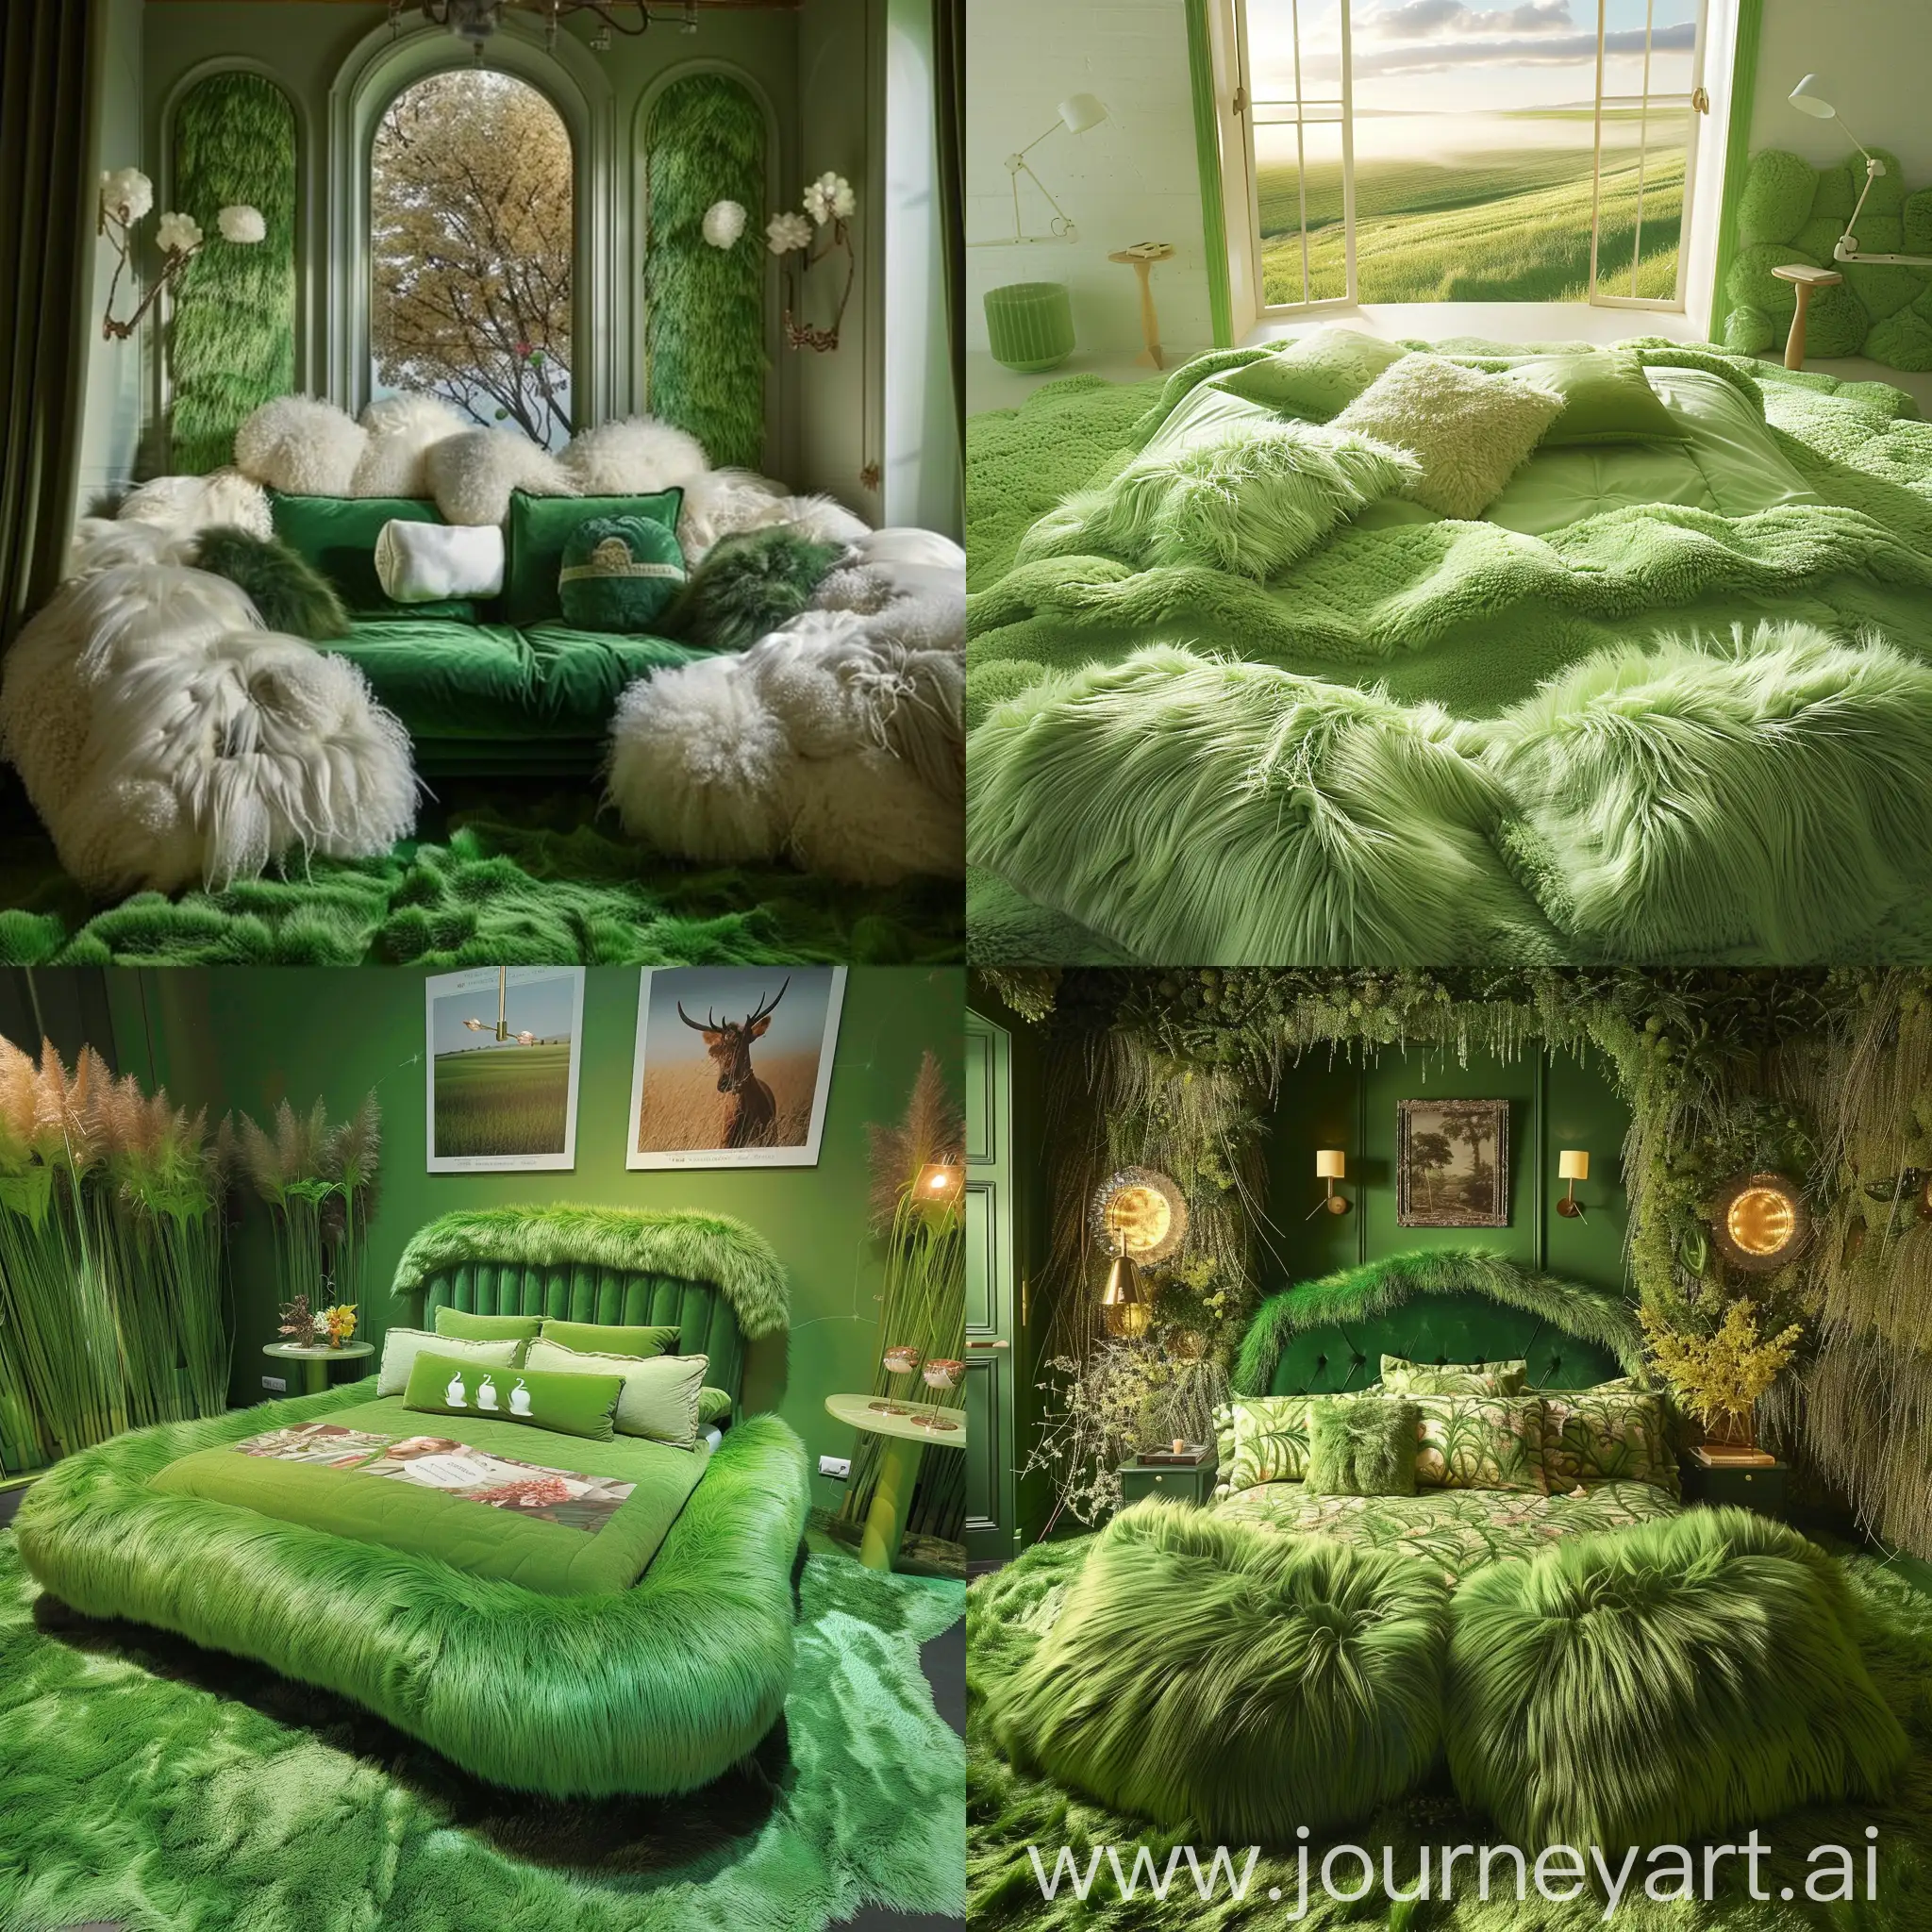 Cozy-Green-GrassStyle-Bedroom-with-Fluffy-Throw-Pillows-and-Iconic-Green-Bed